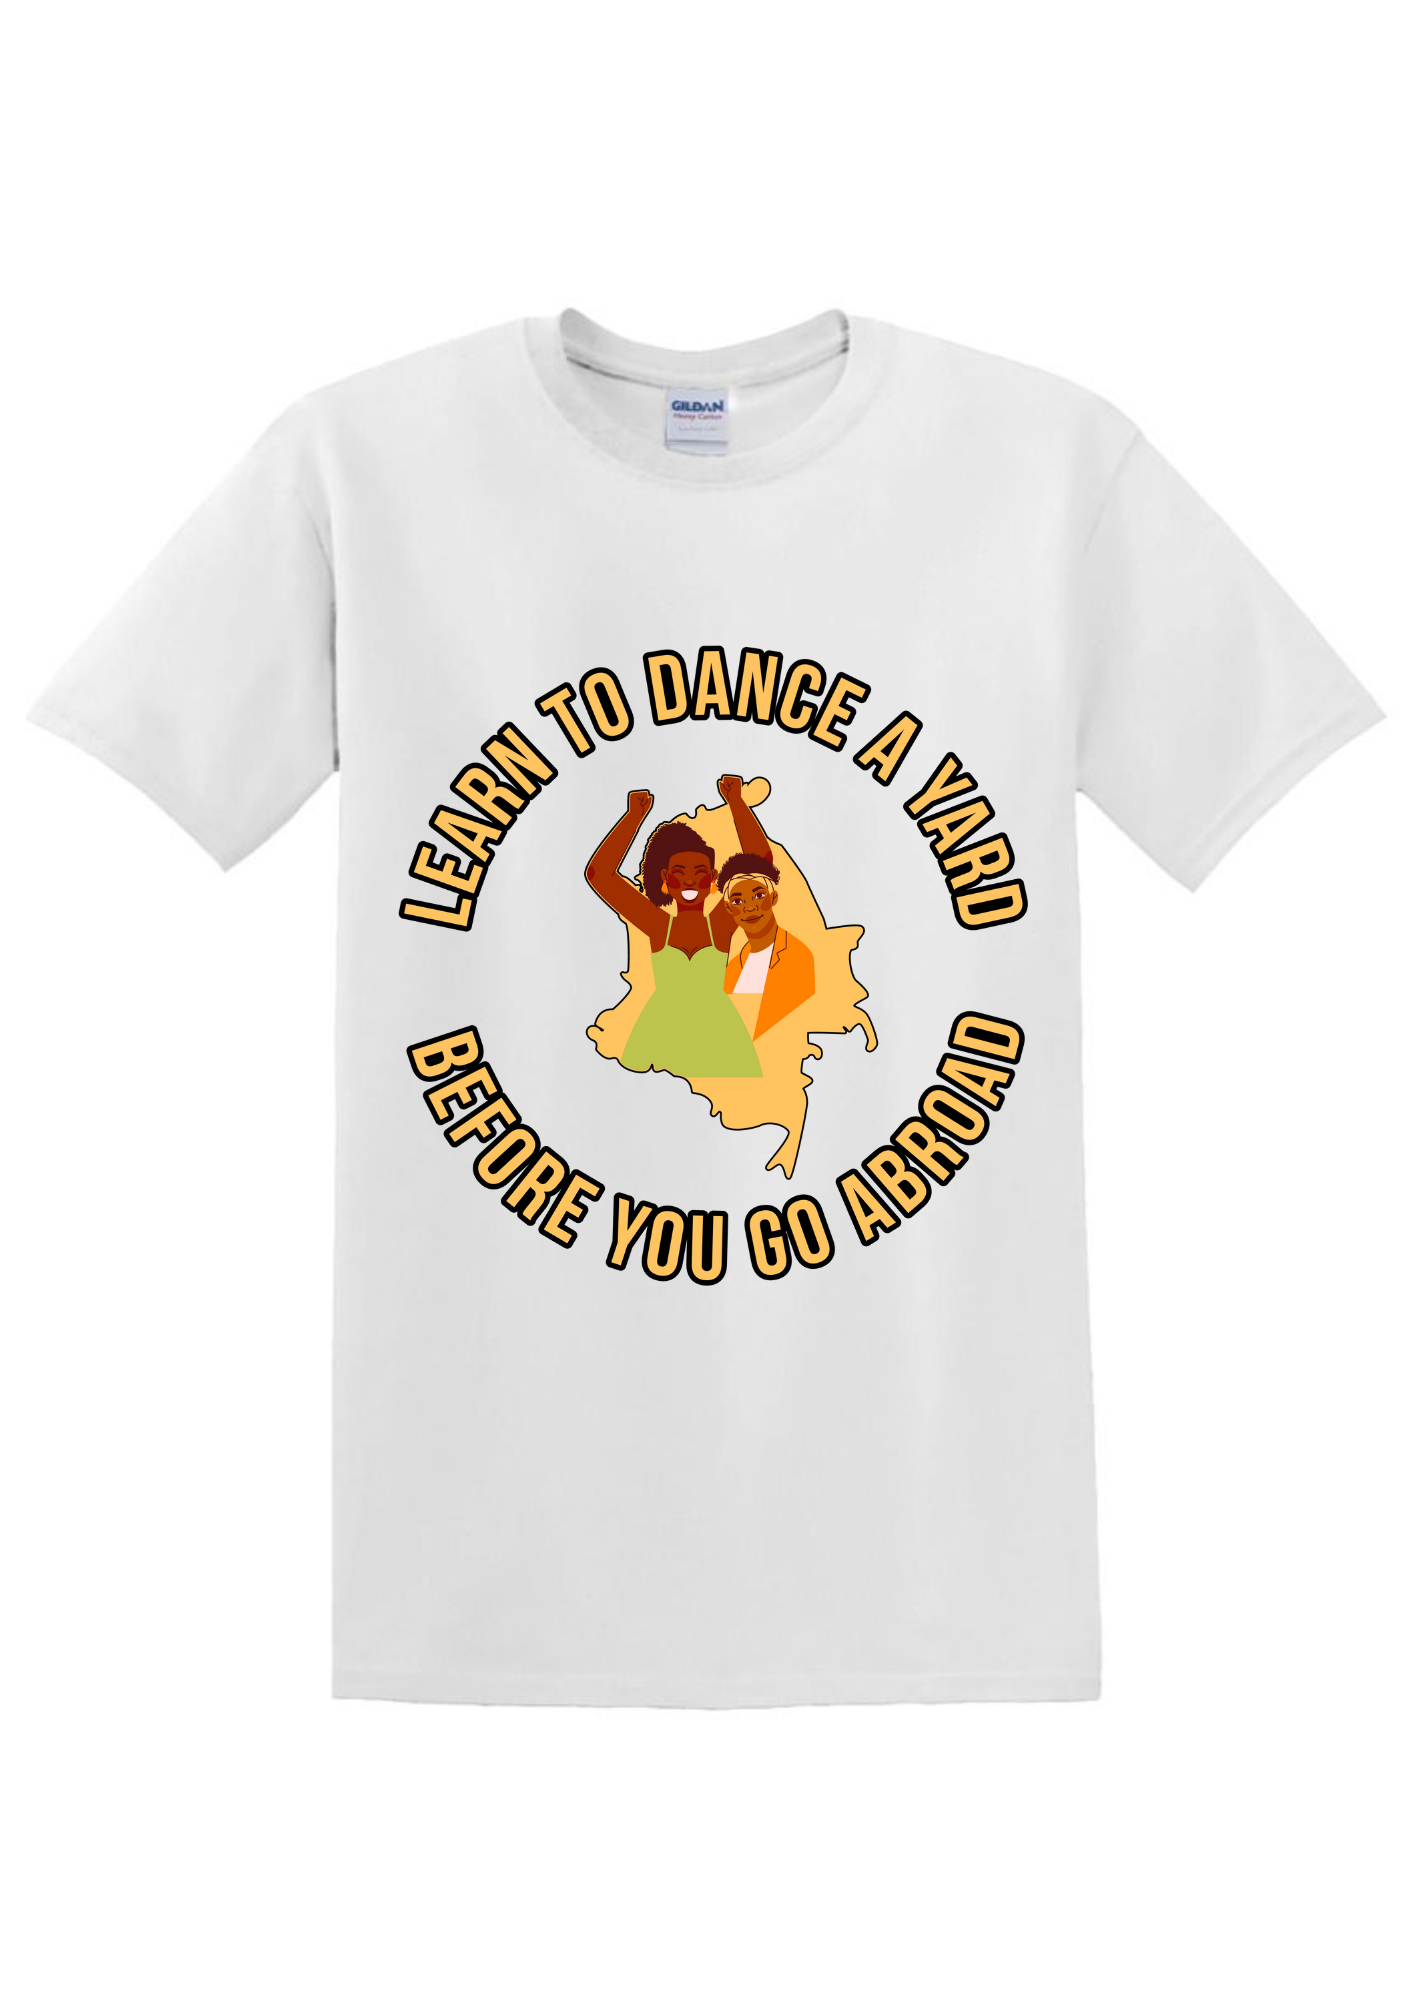 Learn to Dance T-Shirt for sale